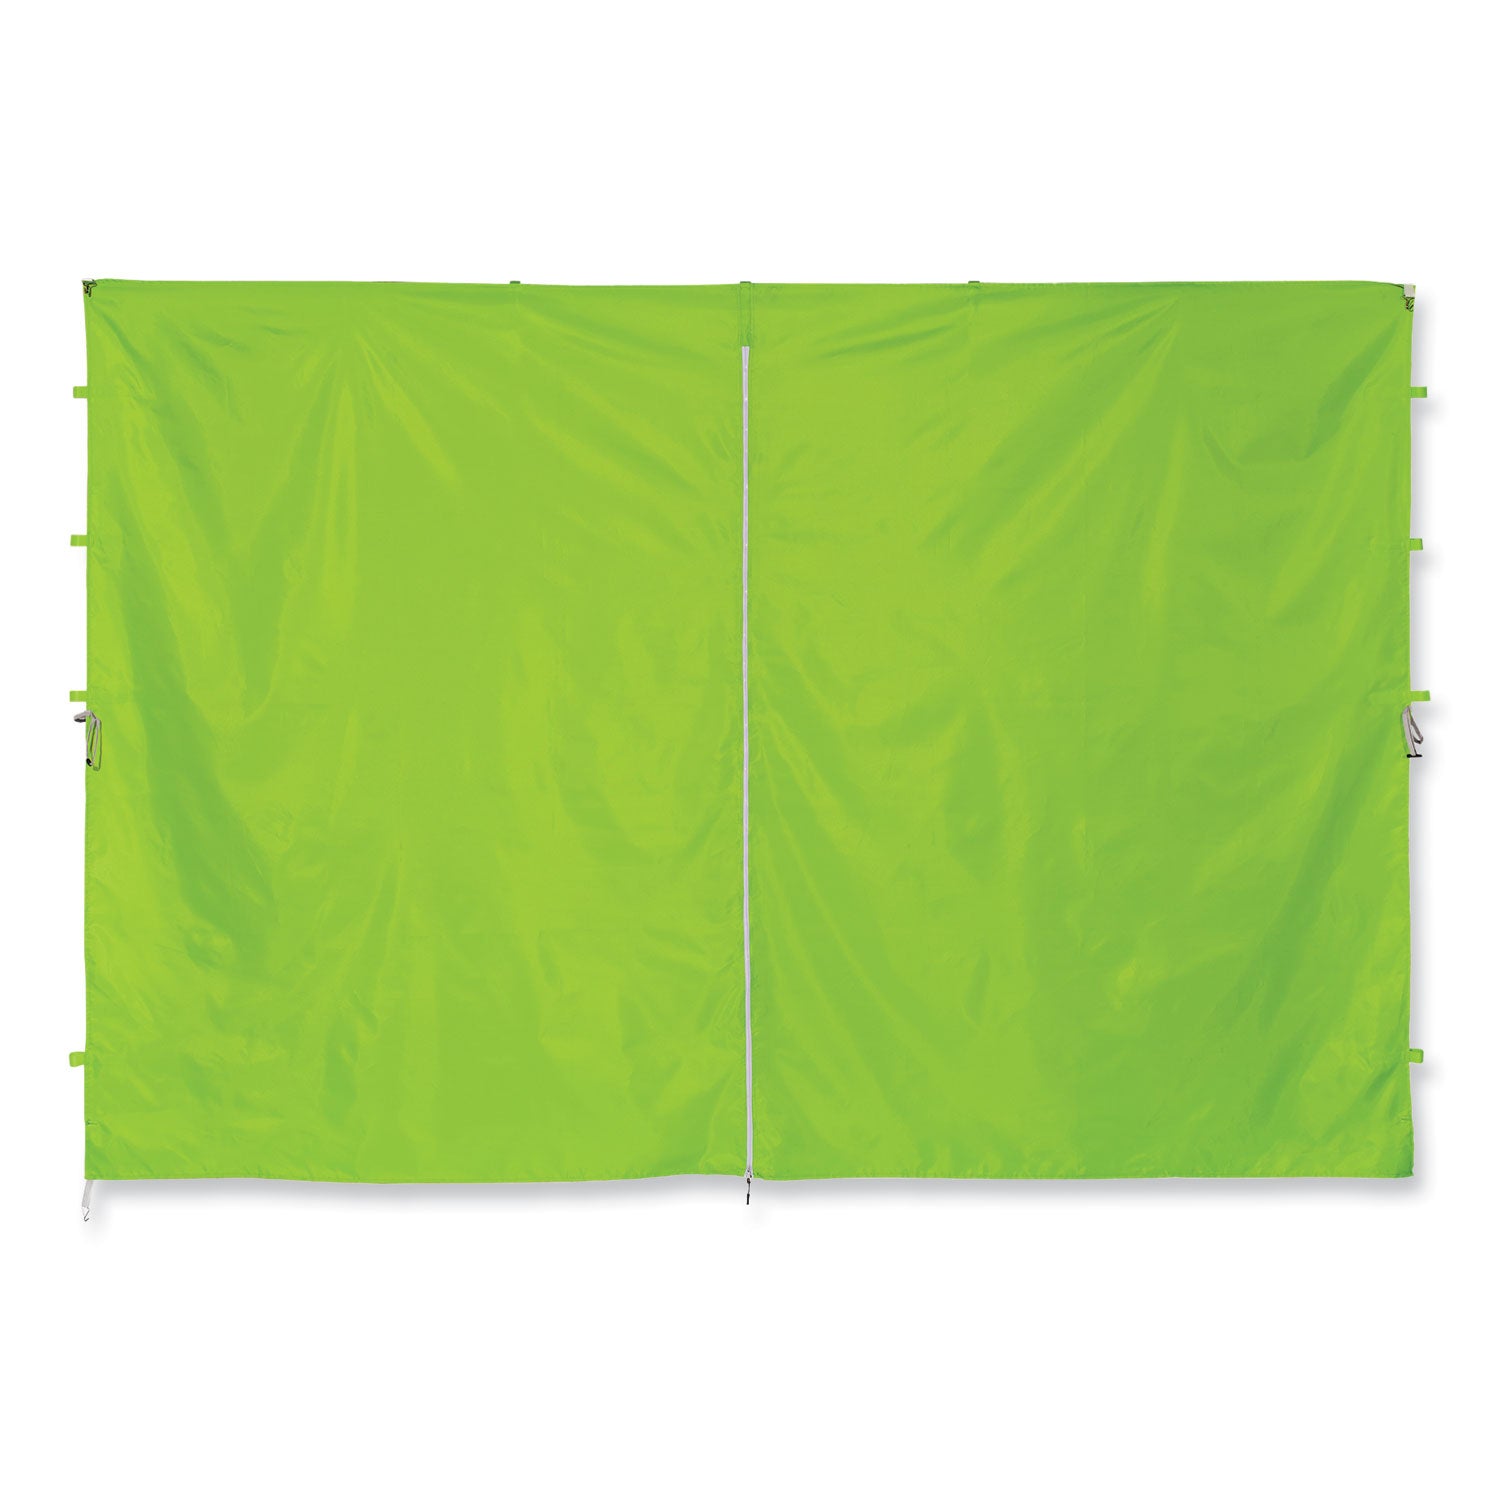 shax-6096-pop-up-tent-sidewall-with-zipper-single-skin-10-ft-x-10-ft-polyester-lime-ships-in-1-3-business-days_ego12978 - 1